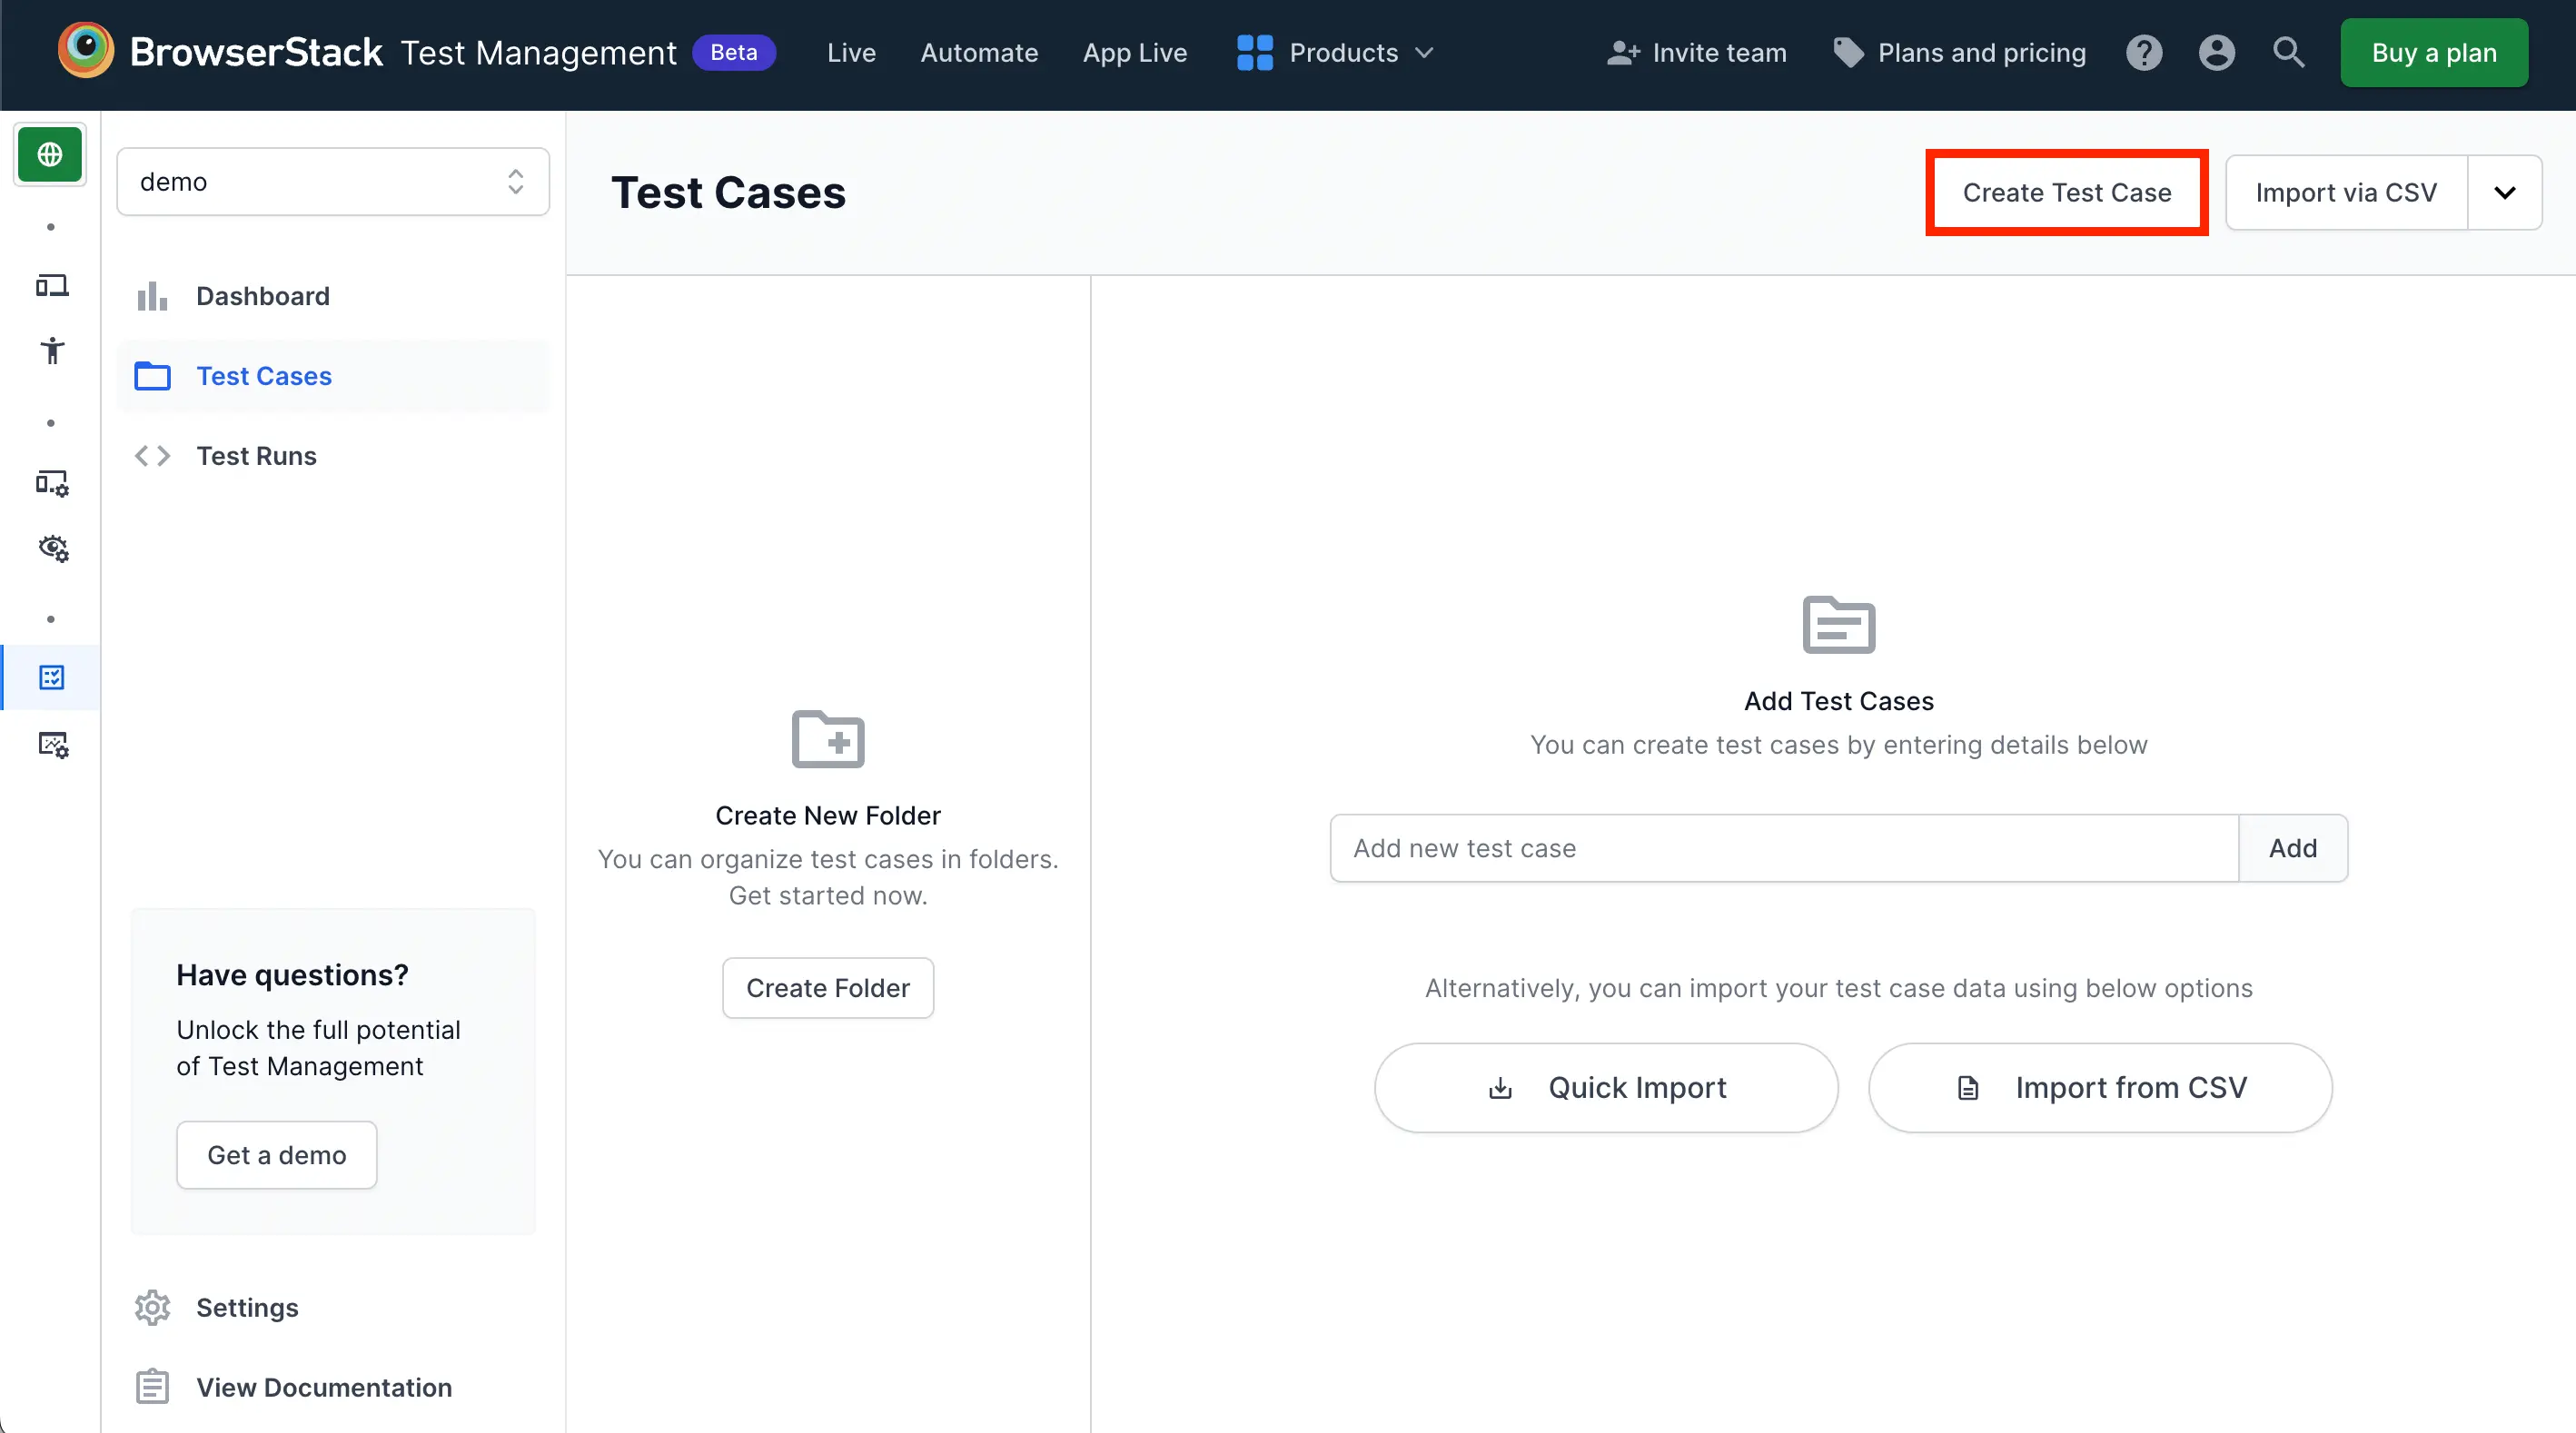 Create test case actions